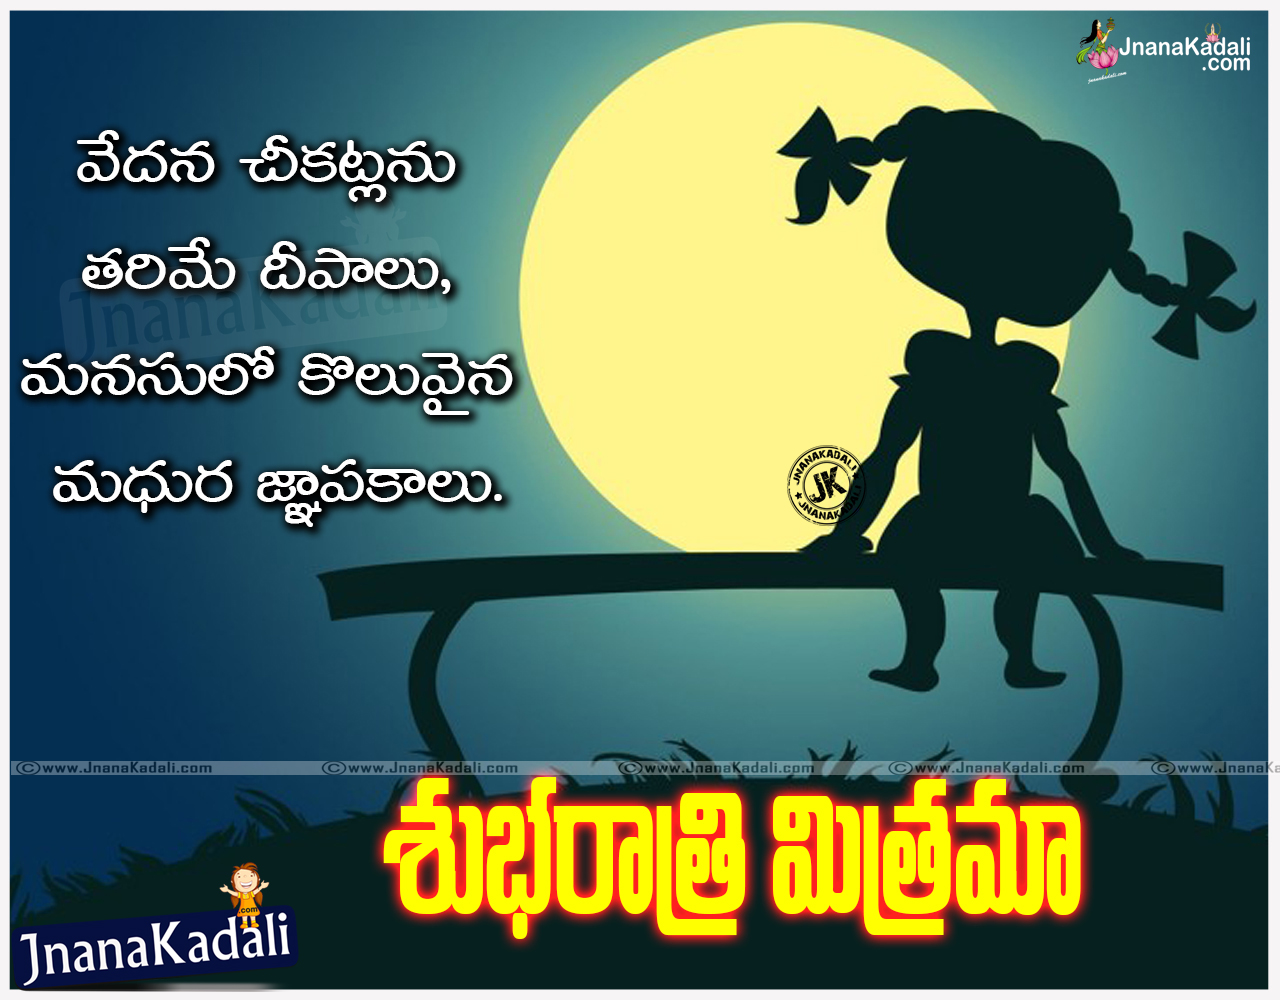 Best Happiness Quotes in telugu Best thoughts about happiness Beautiful Telugu Quotes about happiness